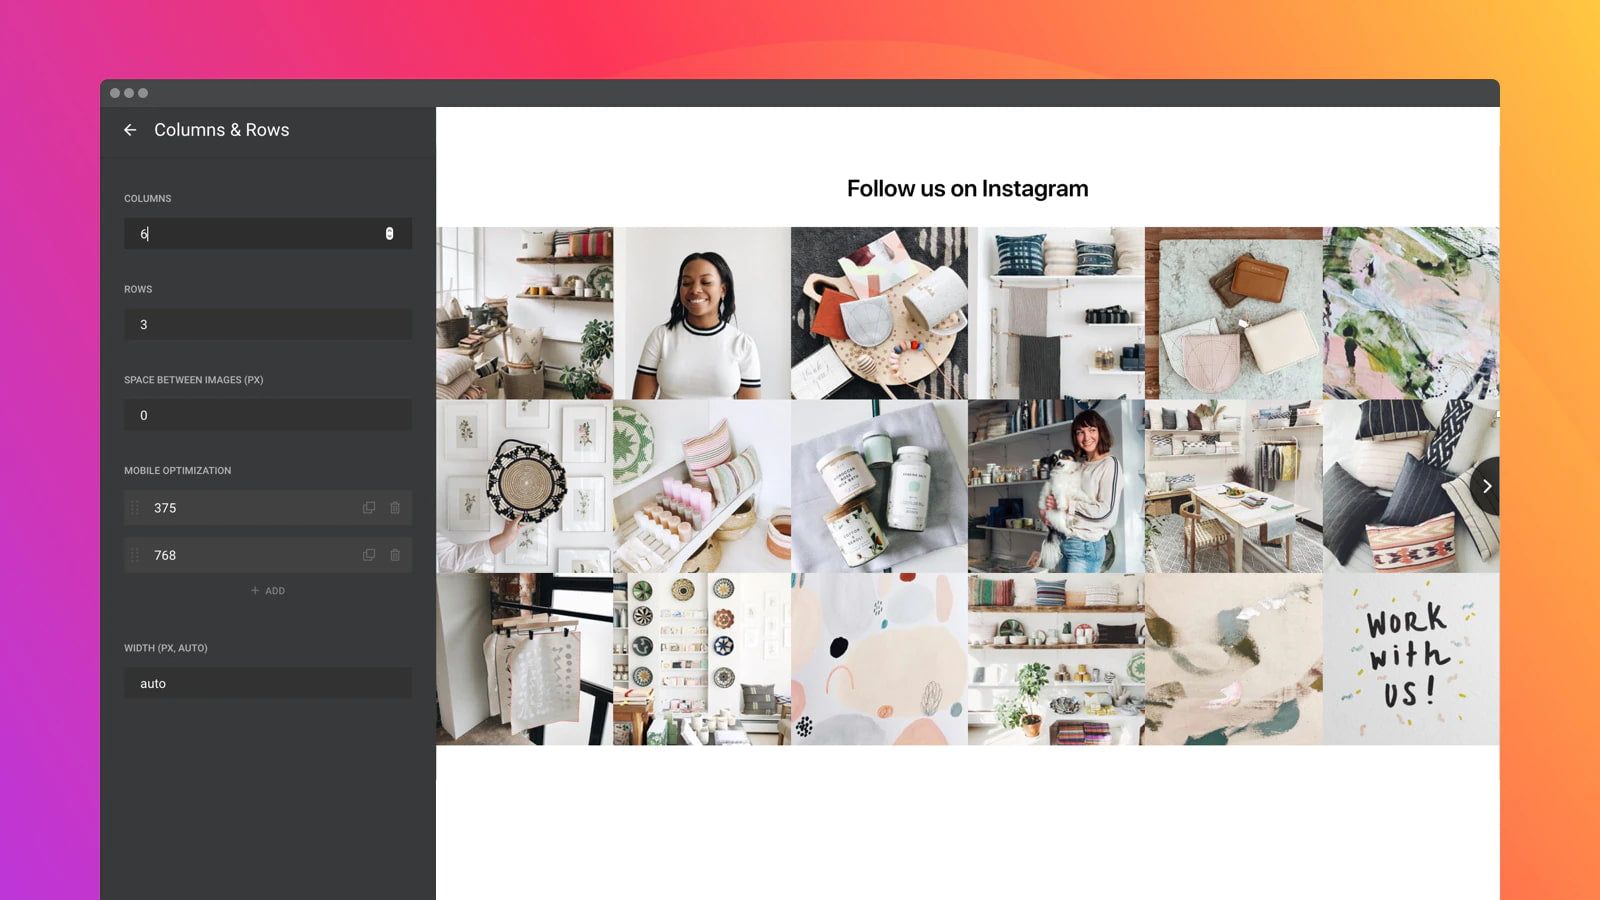 Set the number of columns and rows of the Instagram grid